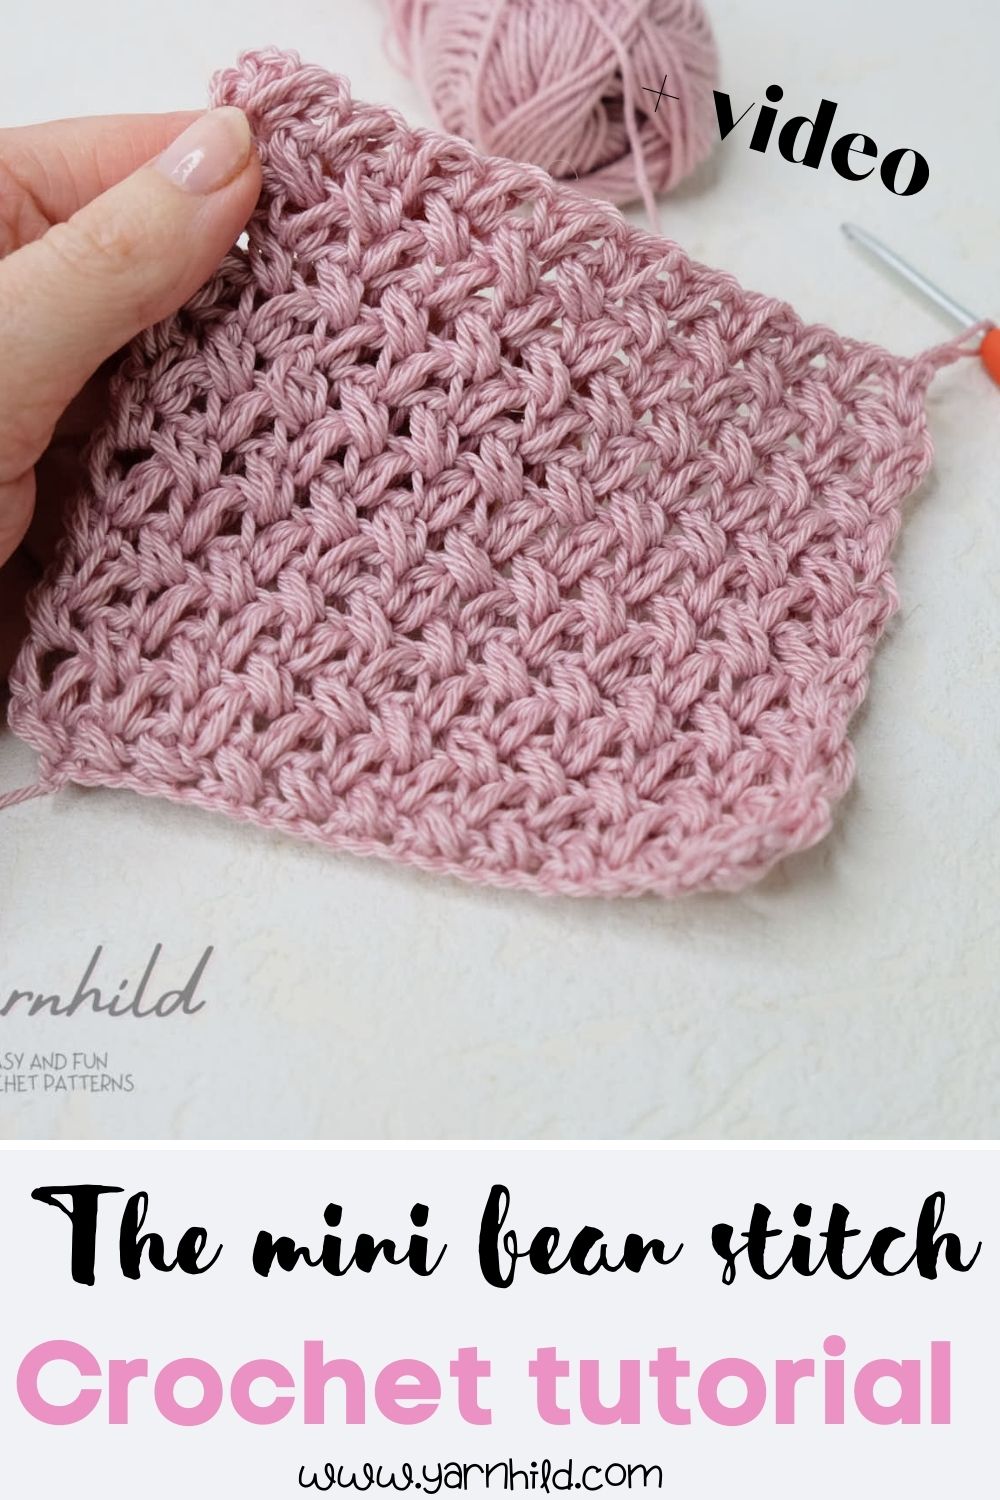 How to crochet the mini bean stitch — For beginners